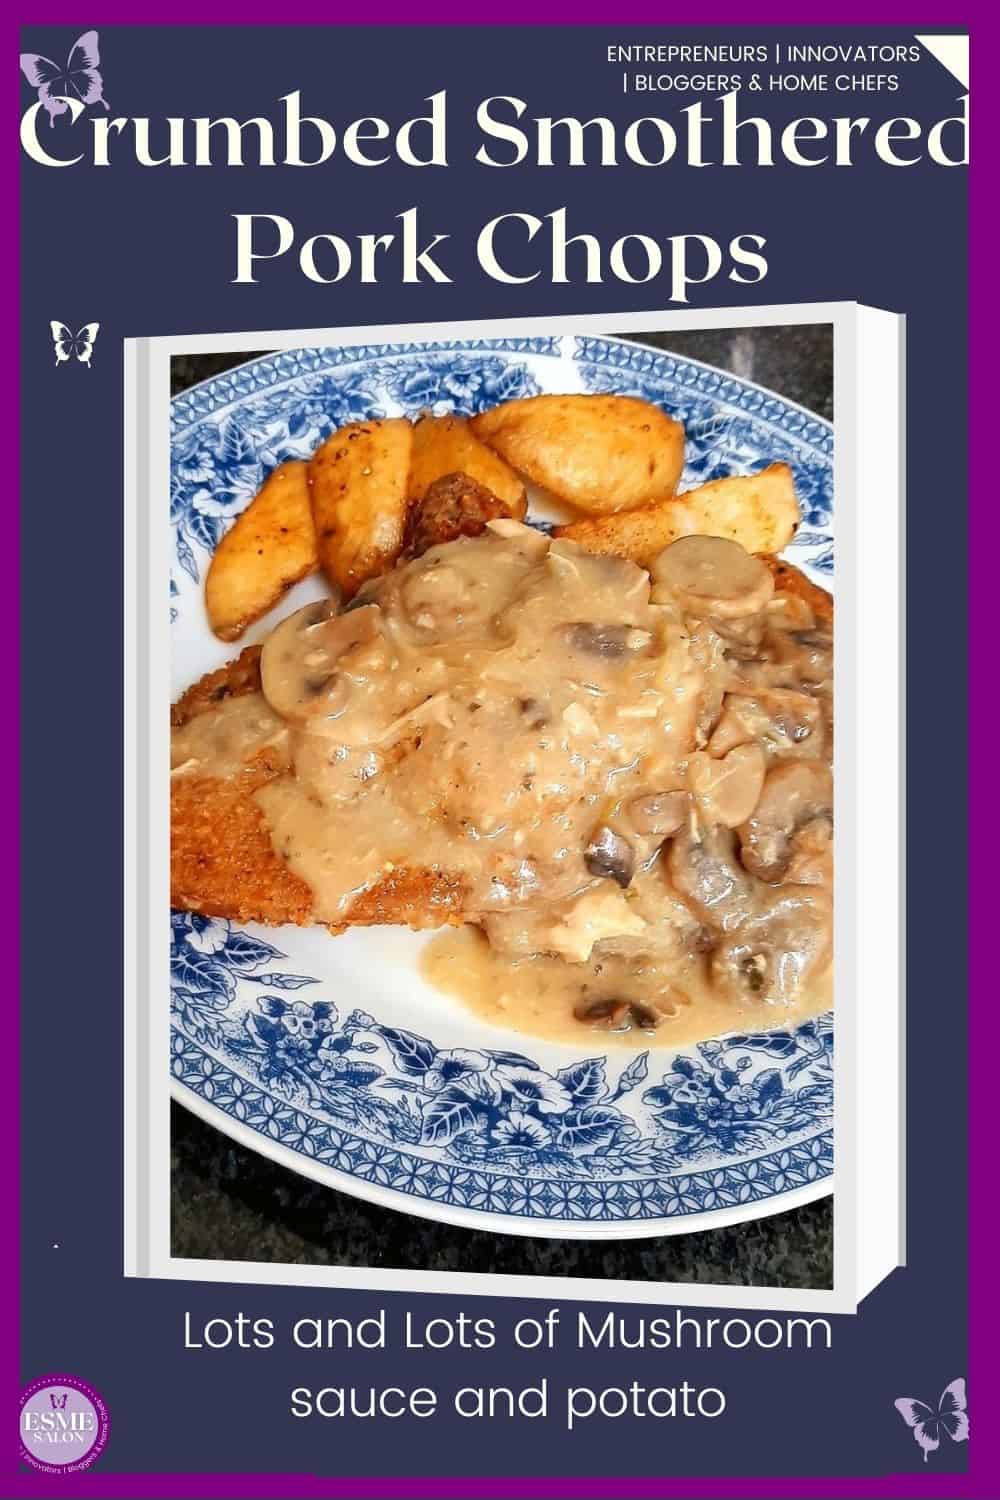 an image of a blue delft plate with Crumbed Smothered Pork Chops, mushroom sauce and potatoes with mushrooms